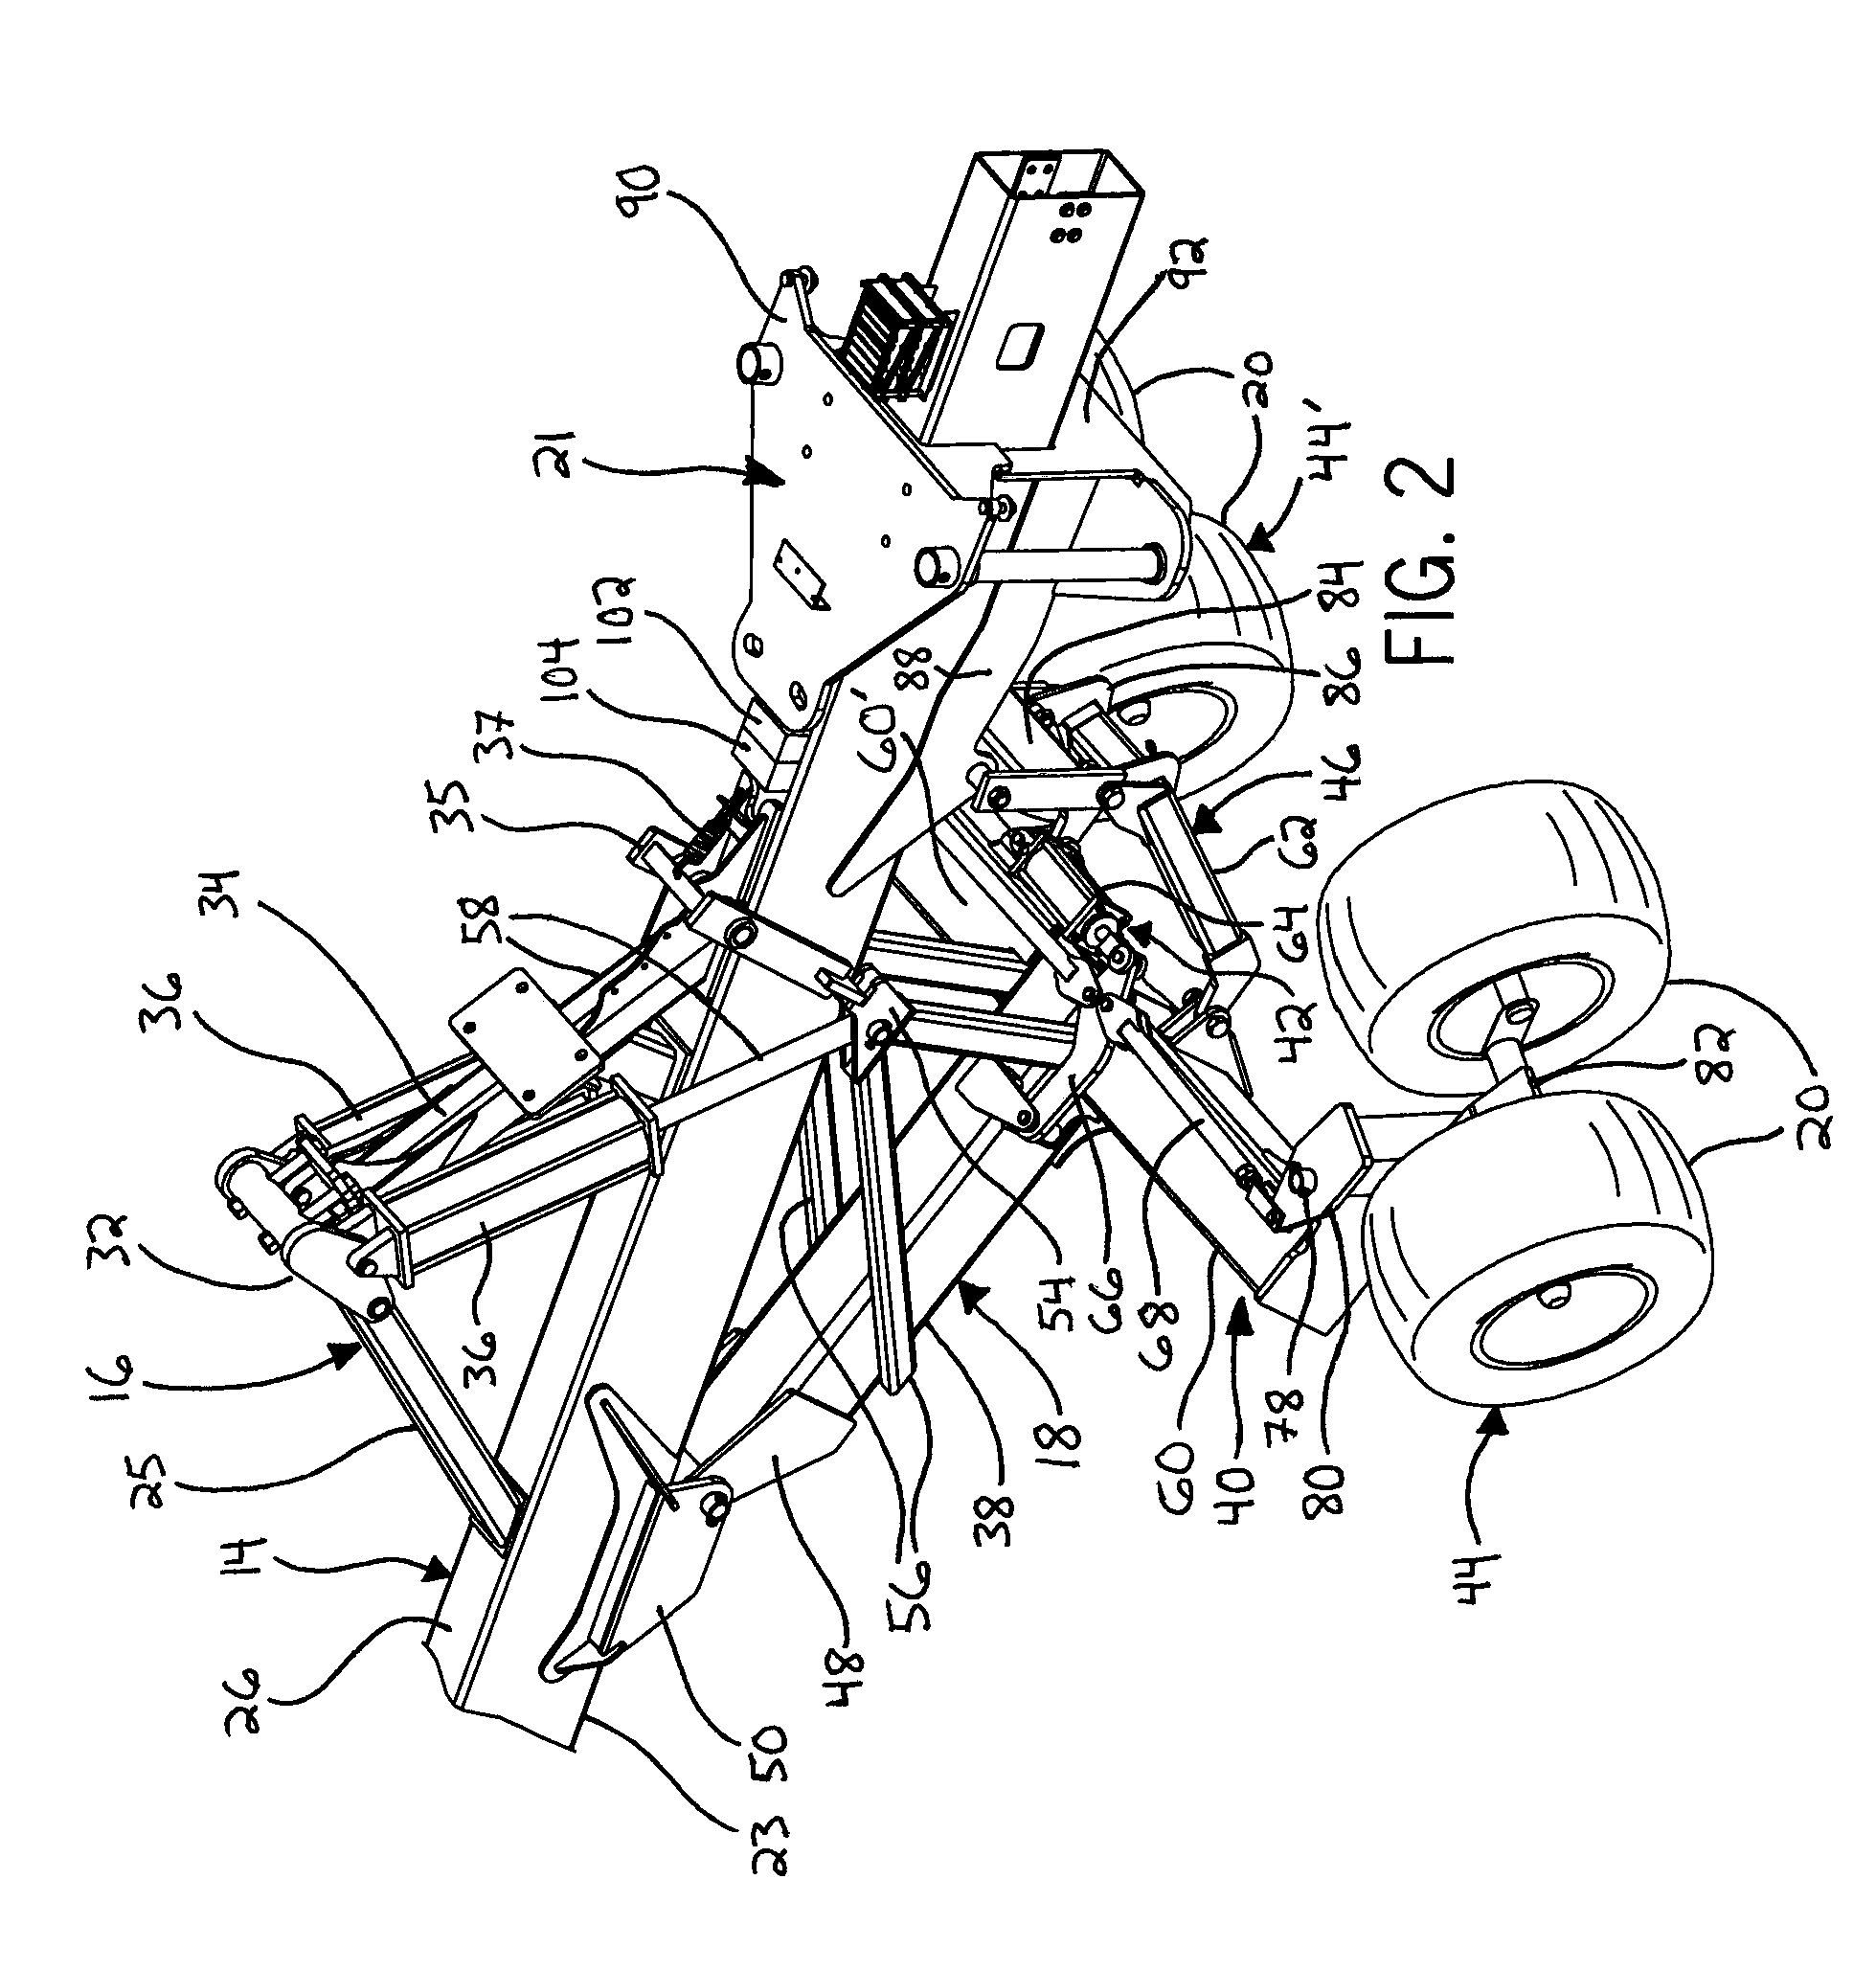 Automatic Steering System For An Agricultural Implement